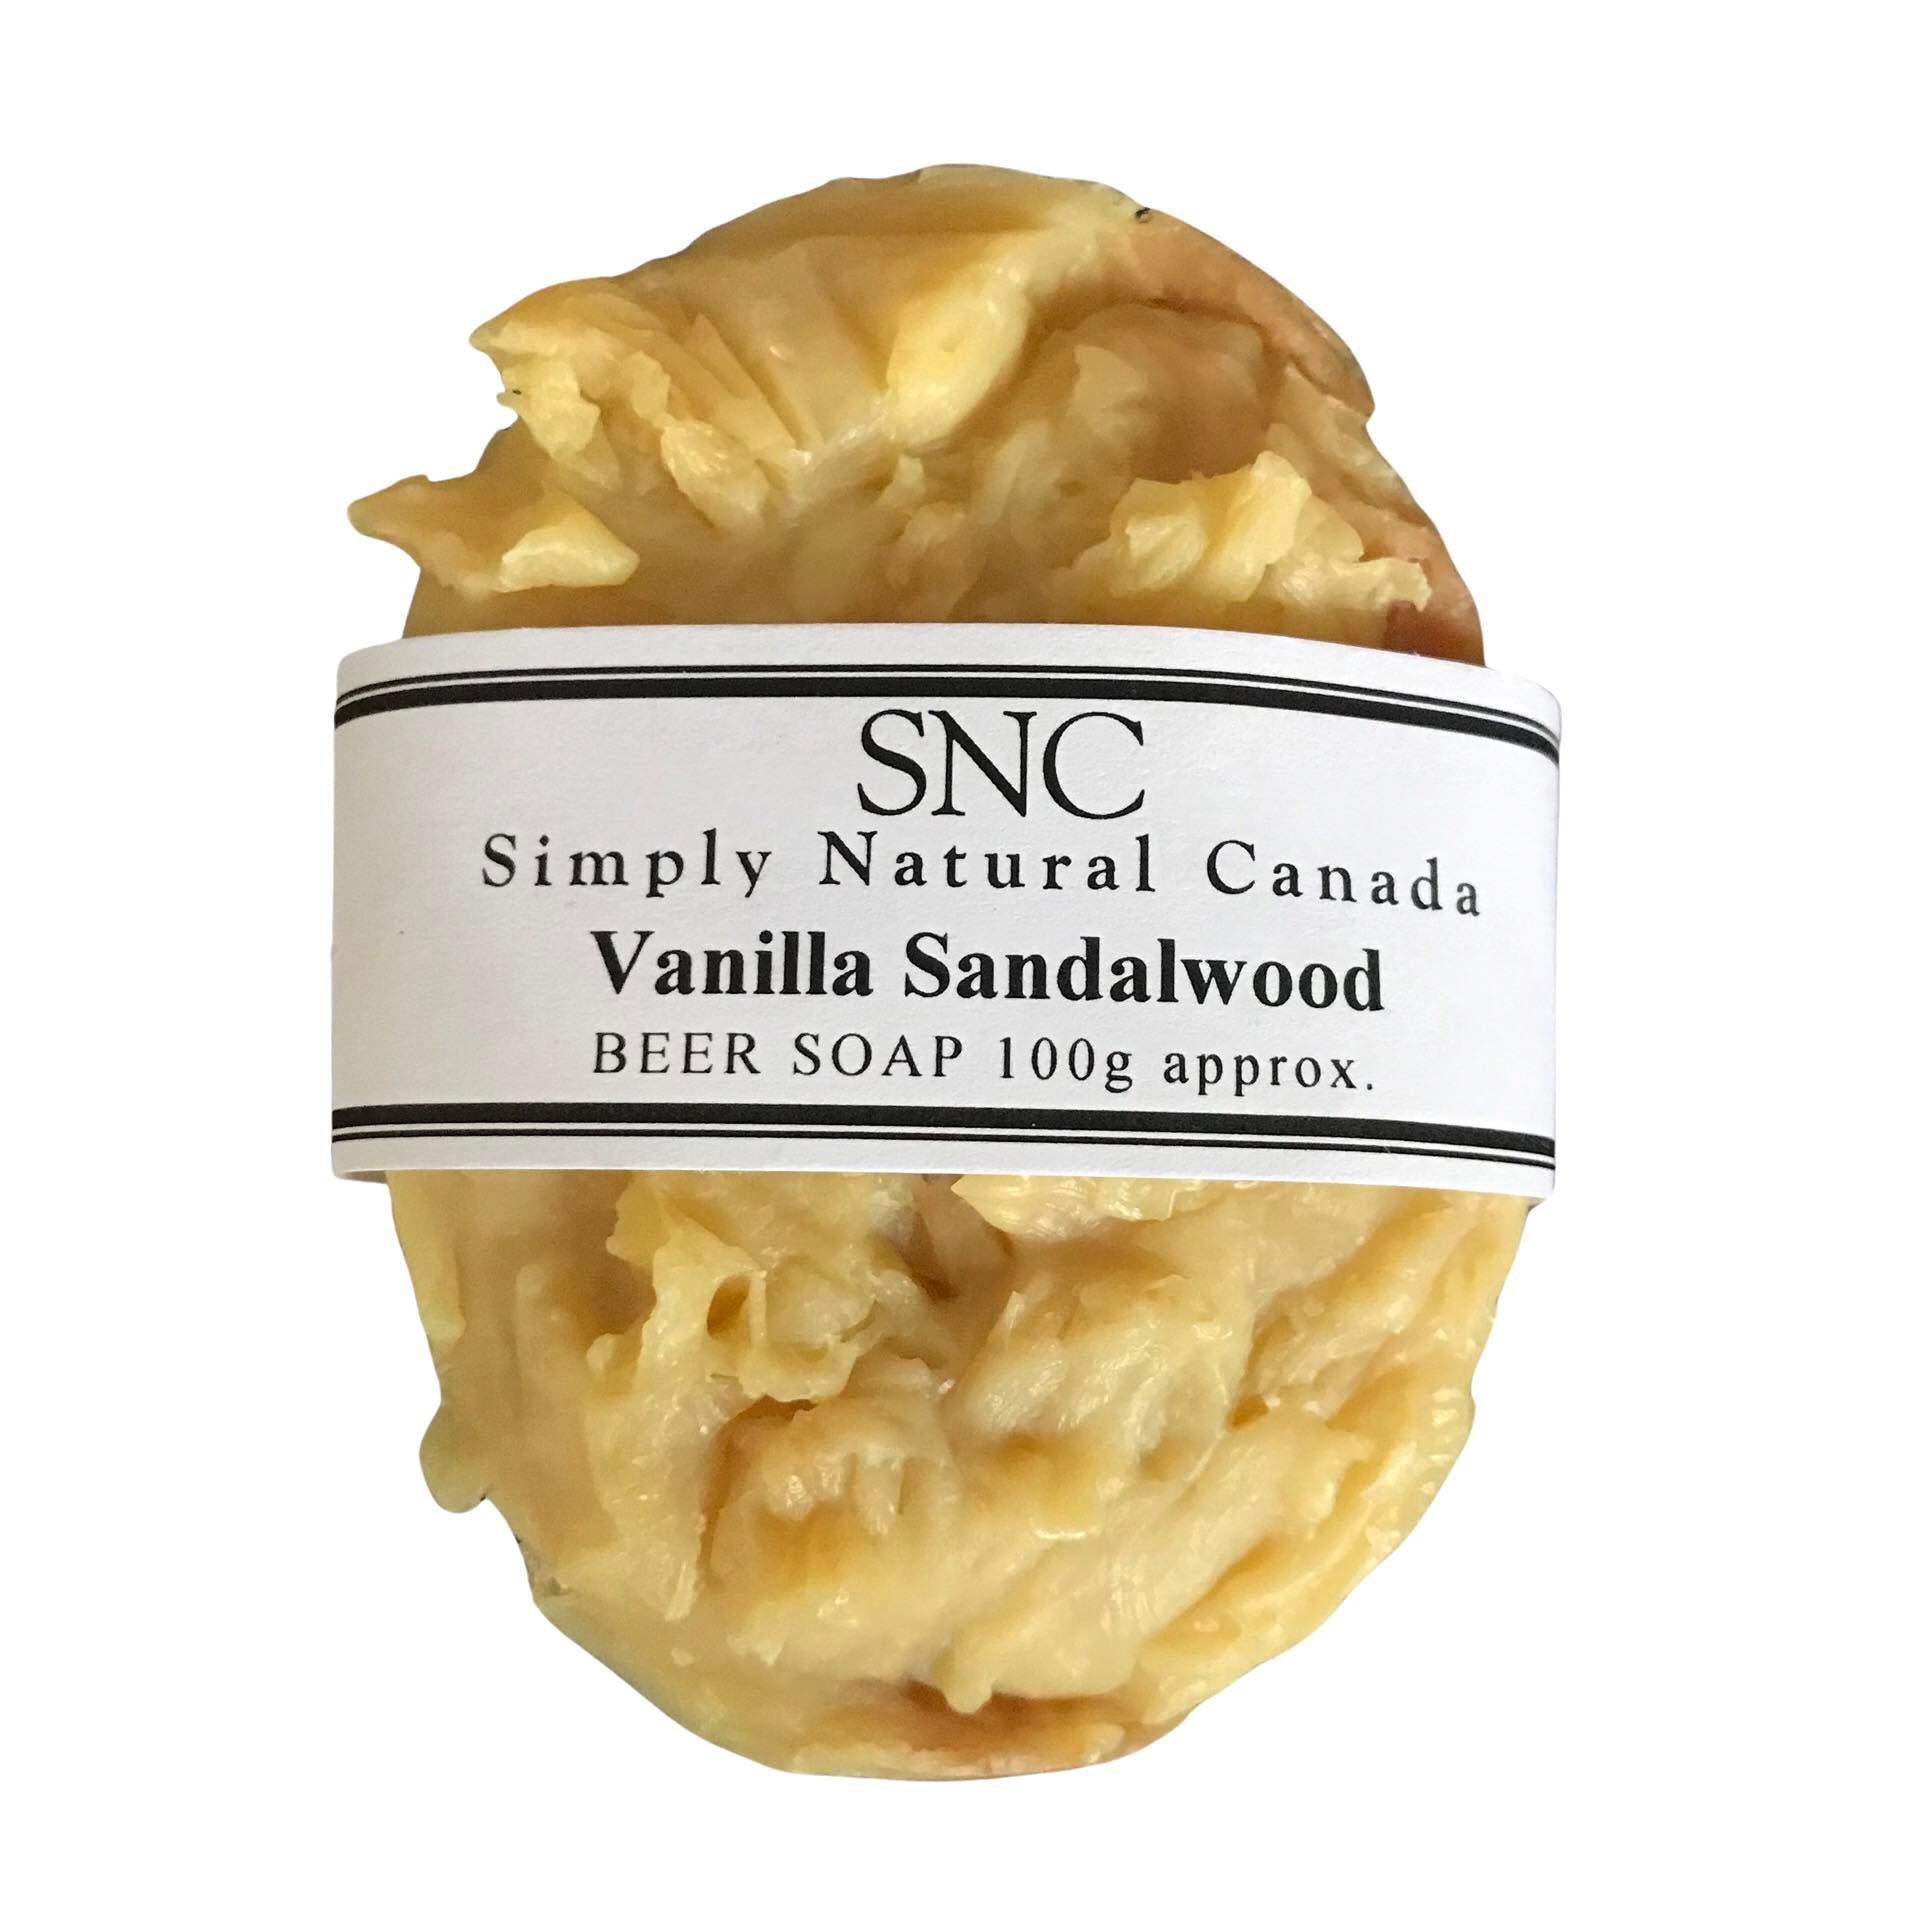 Vanilla sandalwood oval beer soap handcrafted in Canada with local craft beer by Simply Natural Canada